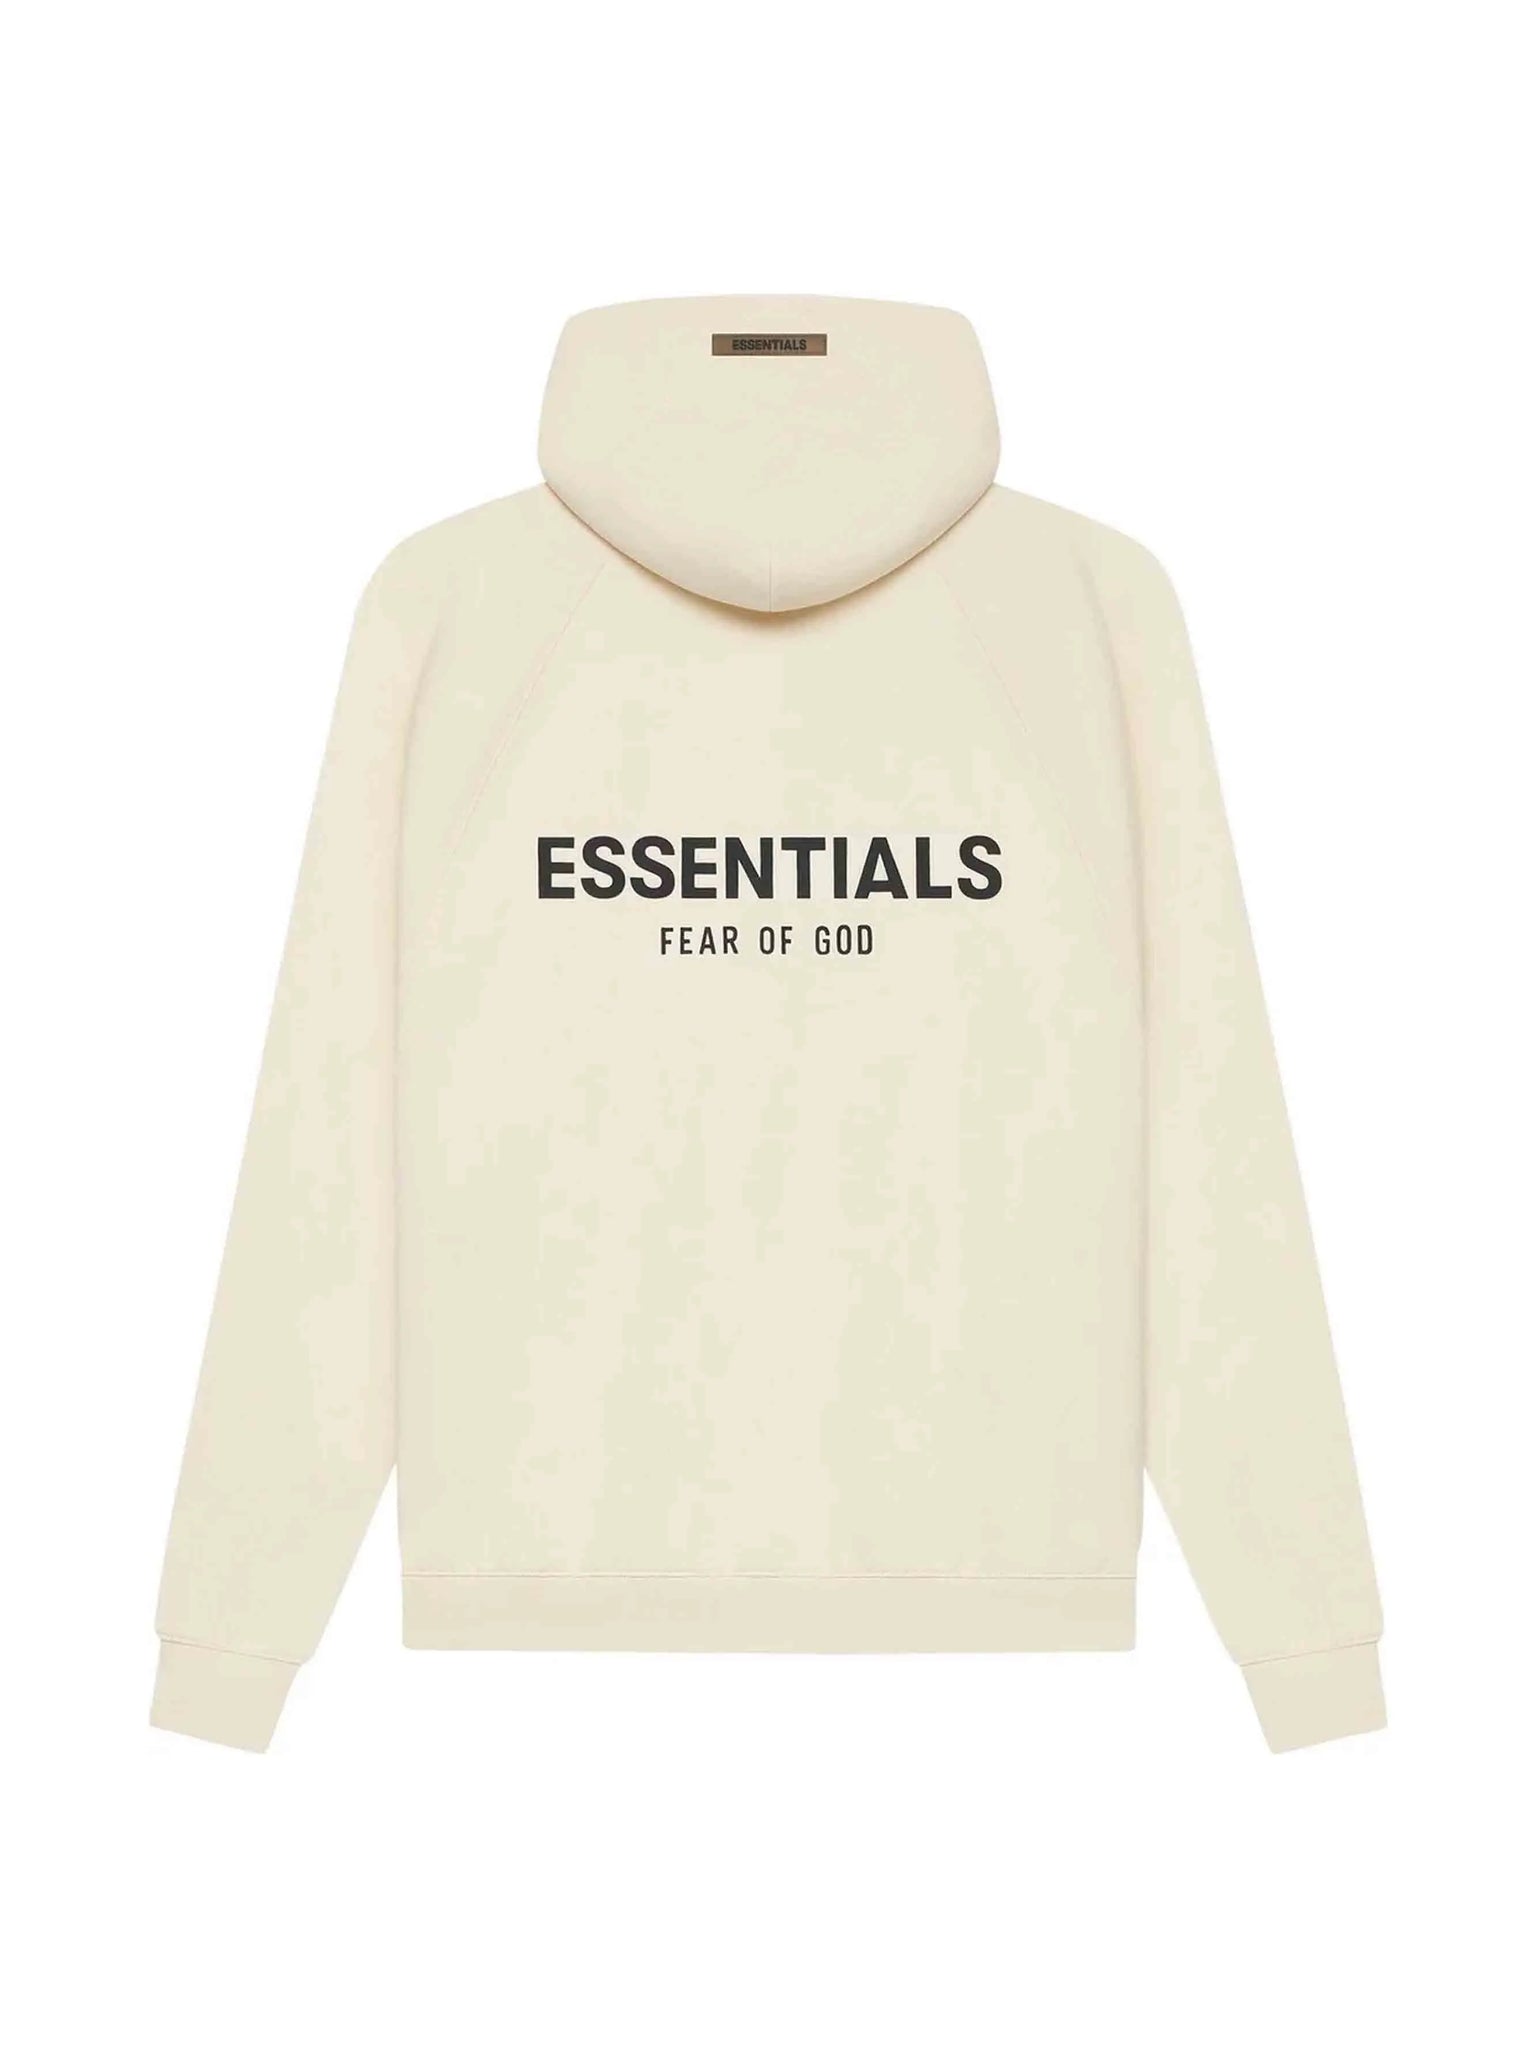 Fear of God Essentials Pull-Over Hoodie (SS21) Cream/Buttercream - Prior